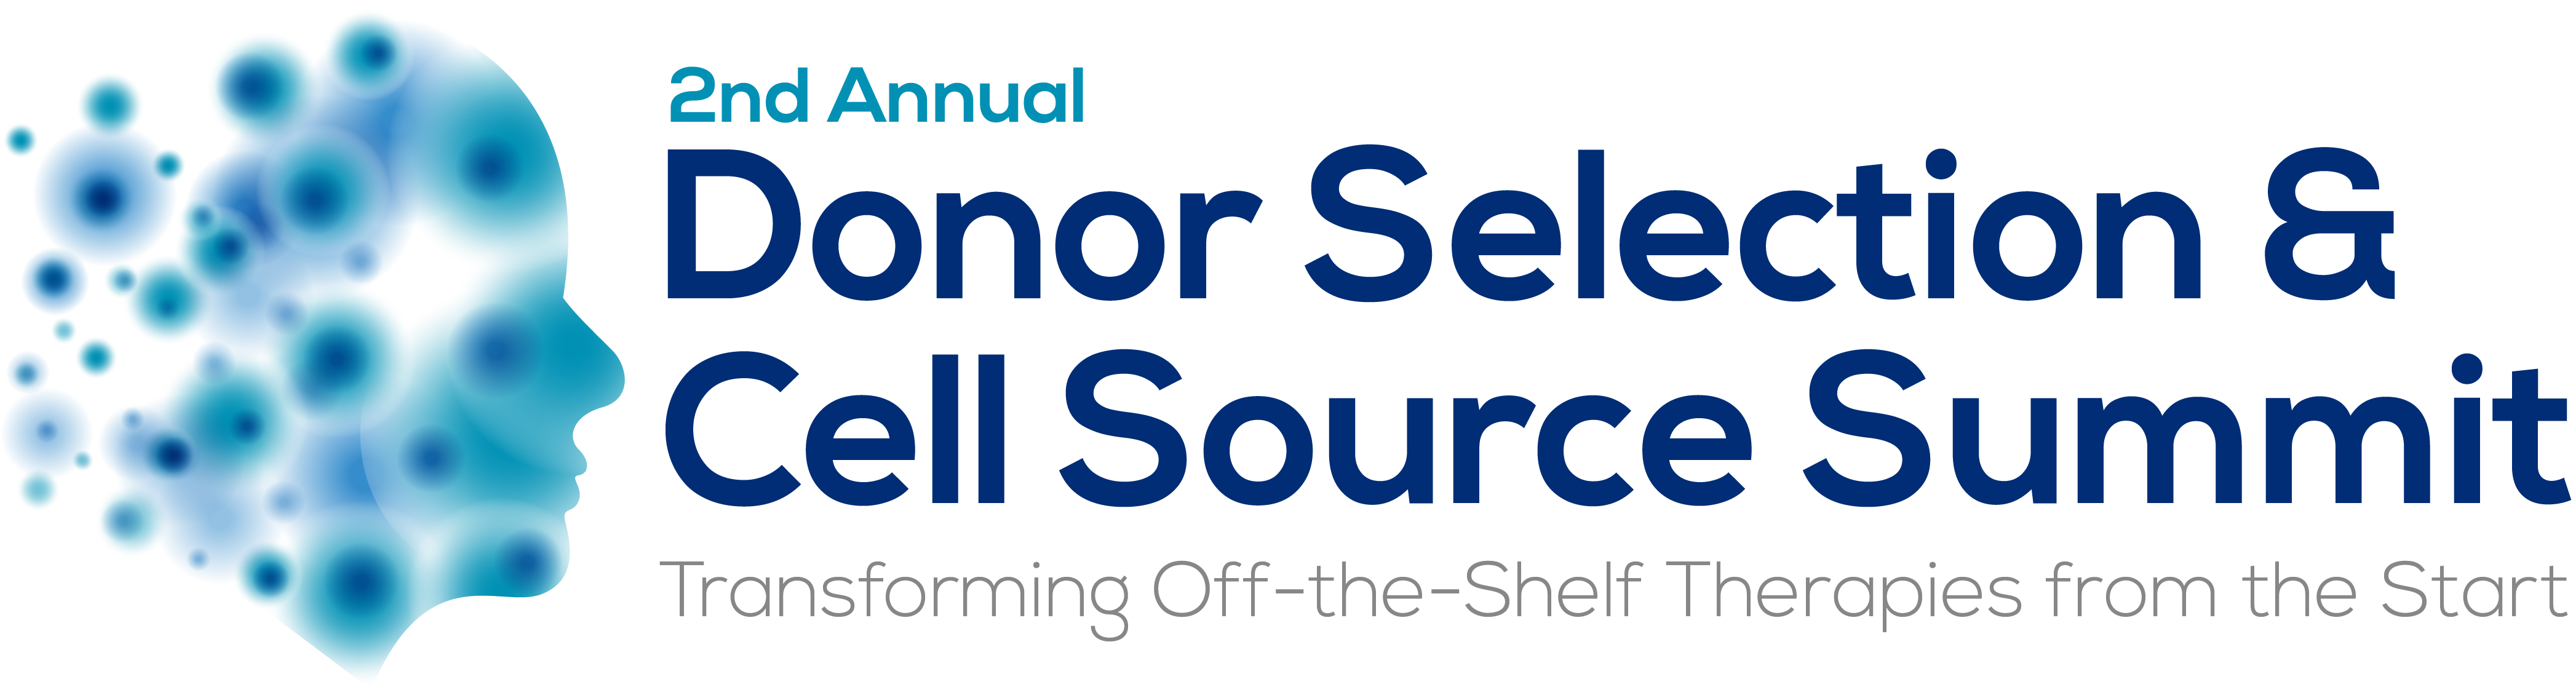 2nd Annual Donor Selection & Cell Source Summit